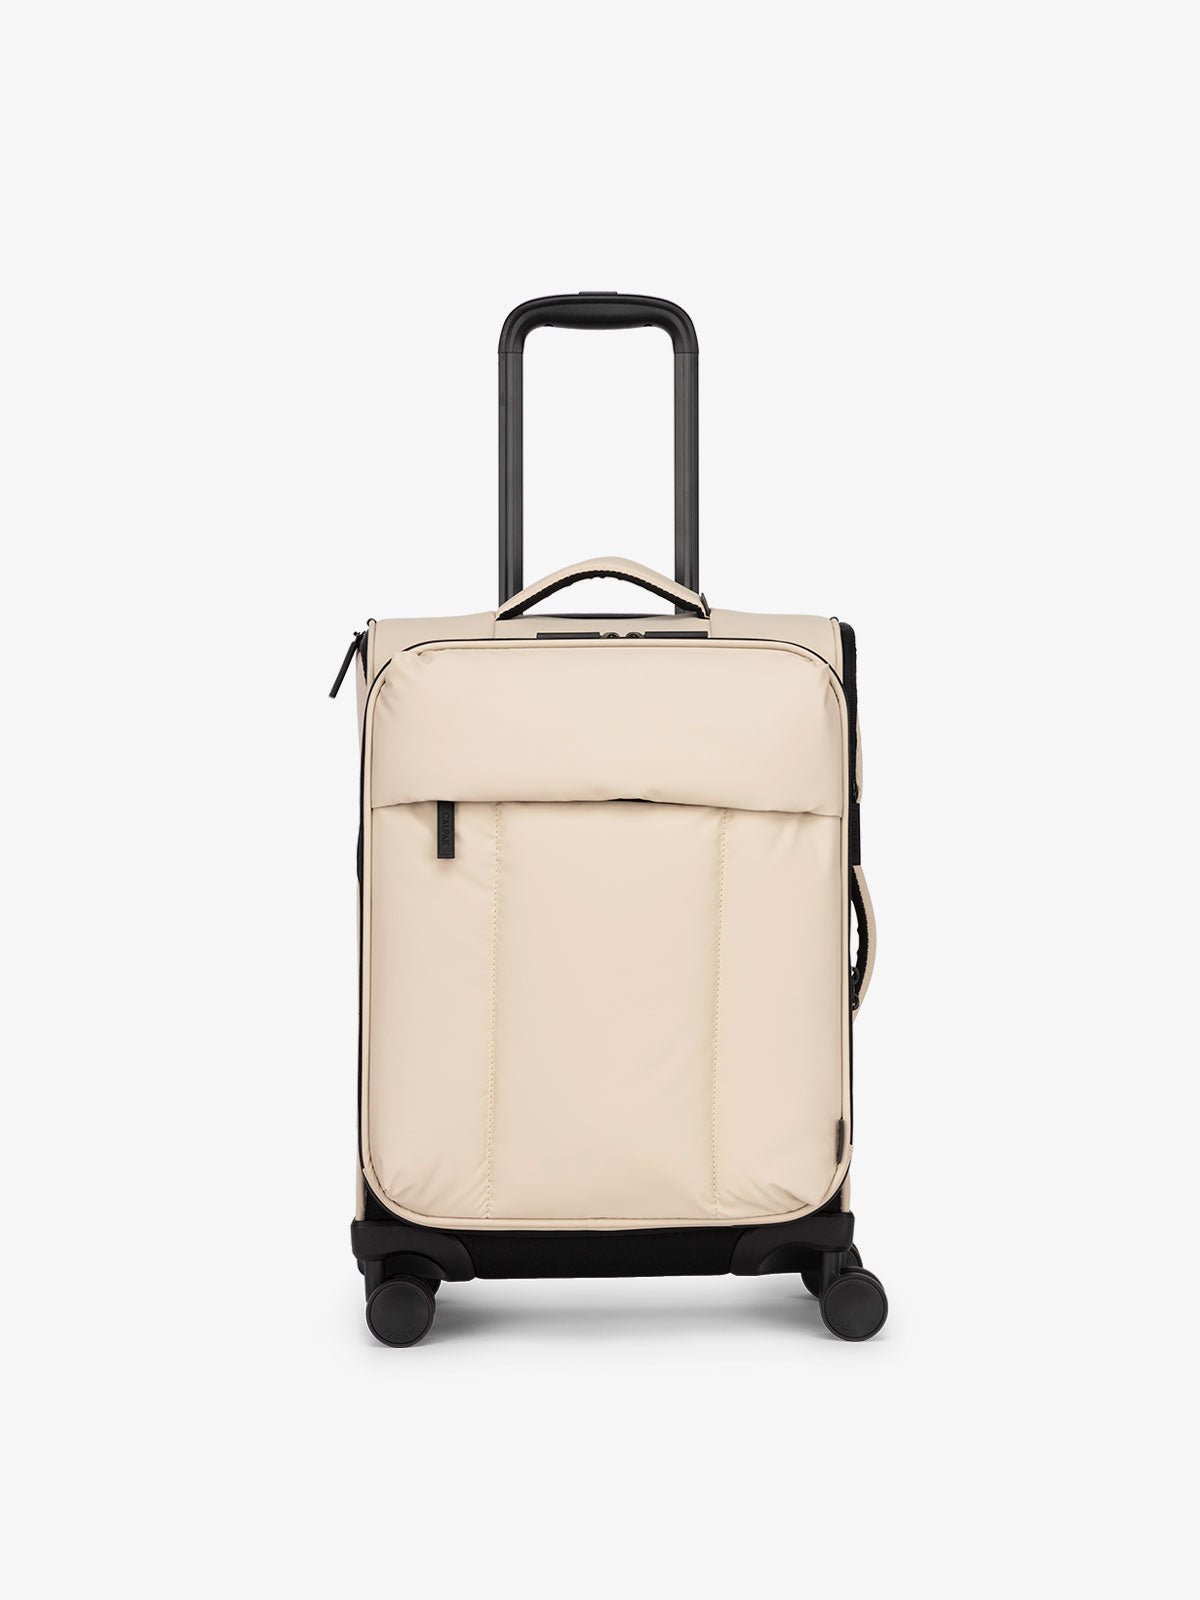 CALPAK Luka soft sided carry on luggage in oatmeal